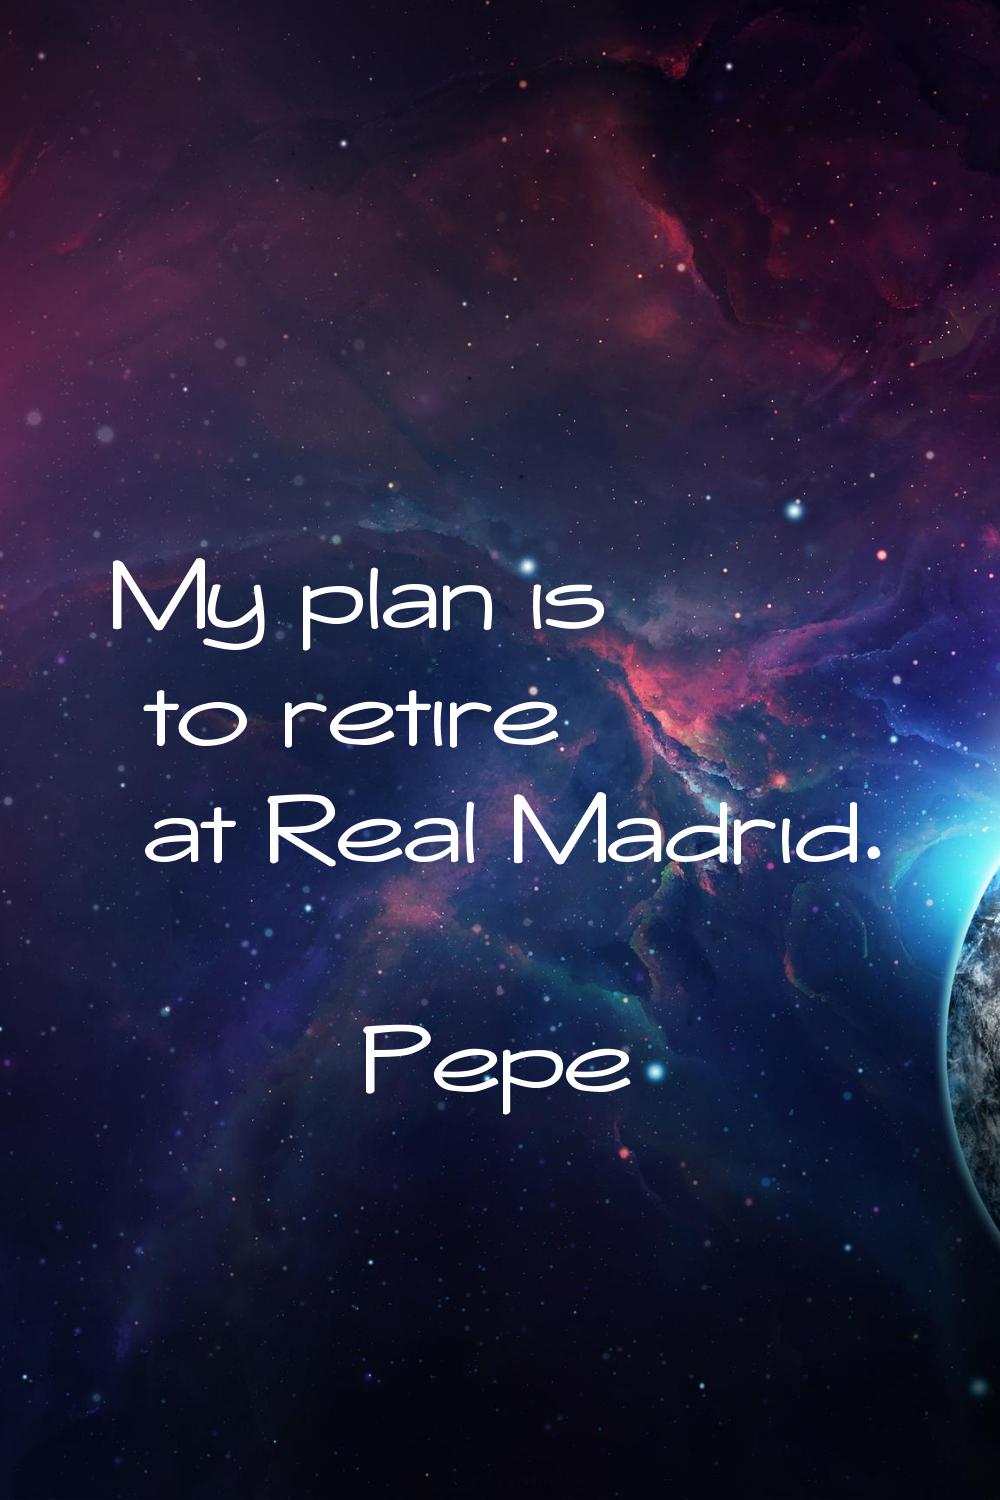 My plan is to retire at Real Madrid.